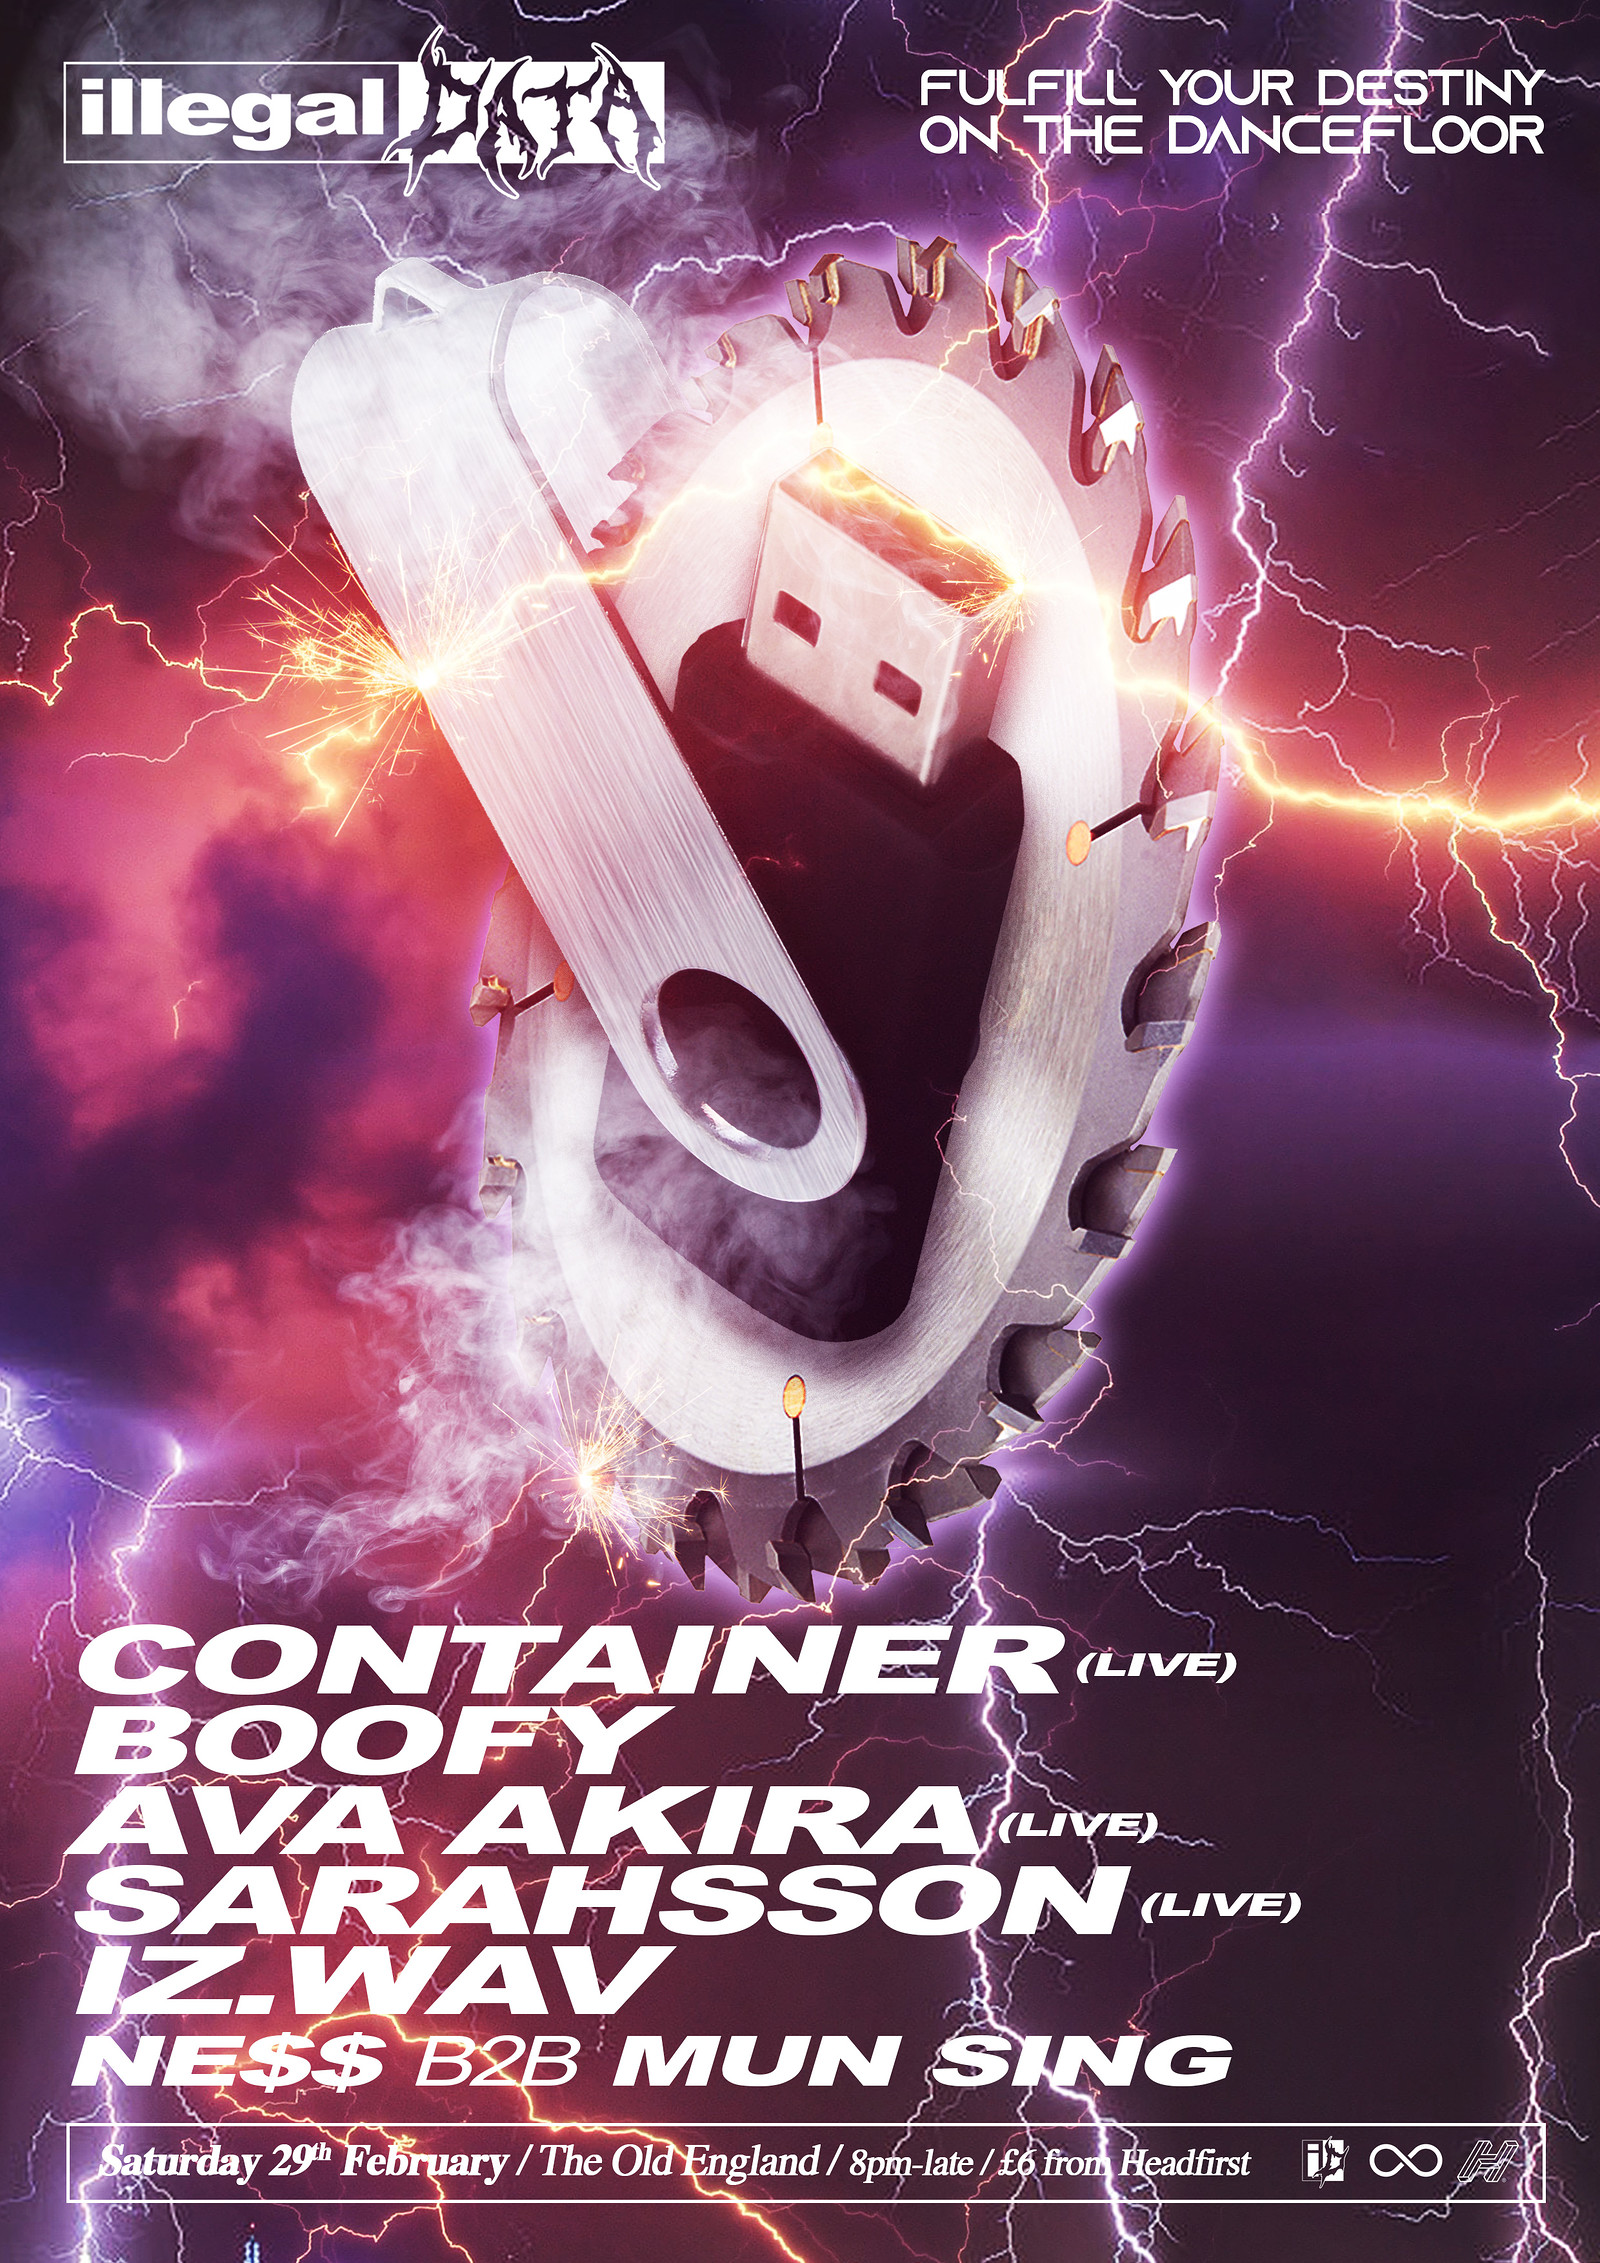 Illegal Data #11: Container / Boofy / Ava Akira ++ at The Old England Pub